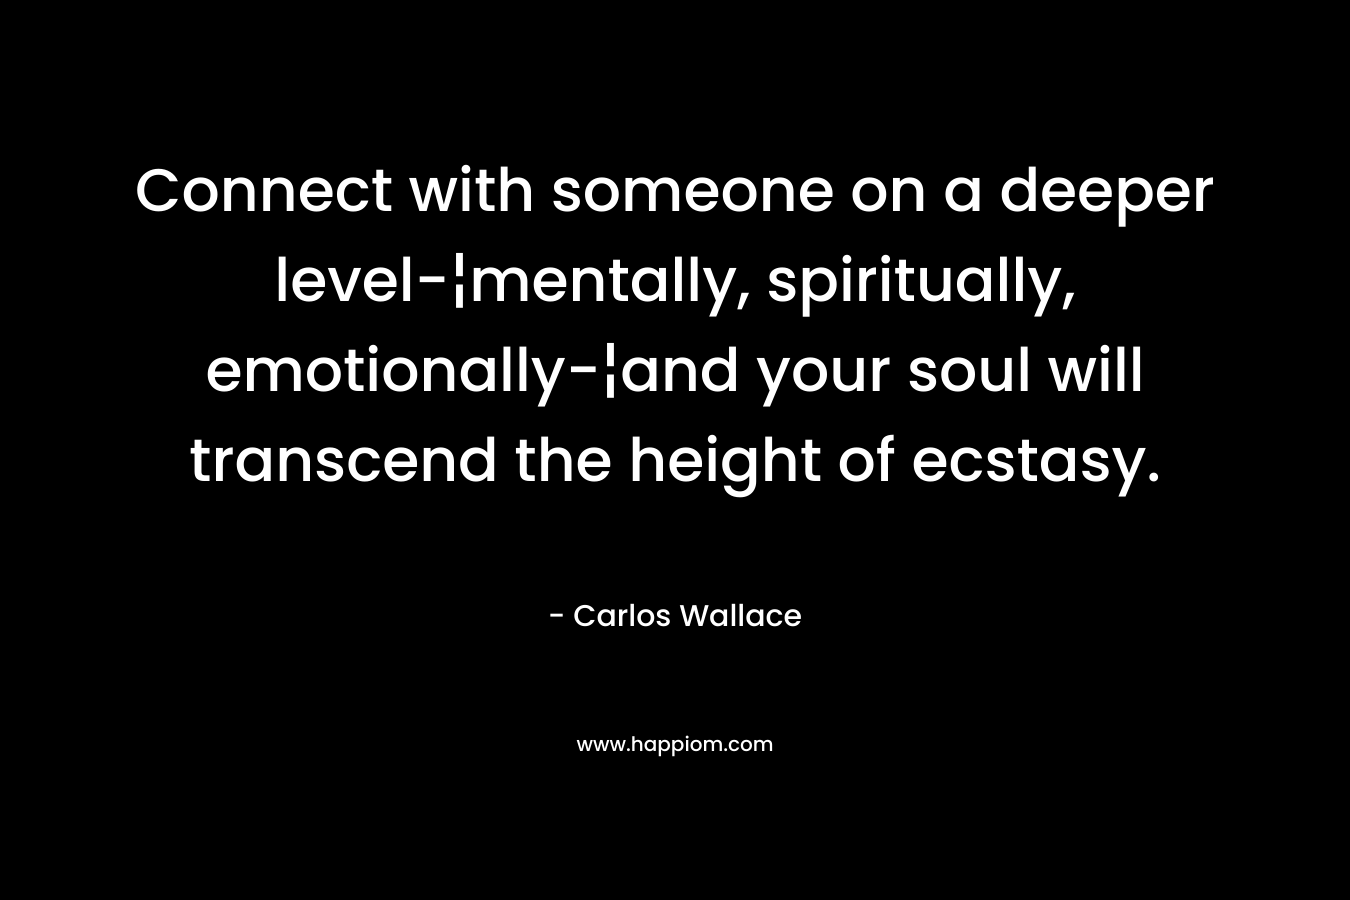 Connect with someone on a deeper level-¦mentally, spiritually, emotionally-¦and your soul will transcend the height of ecstasy.